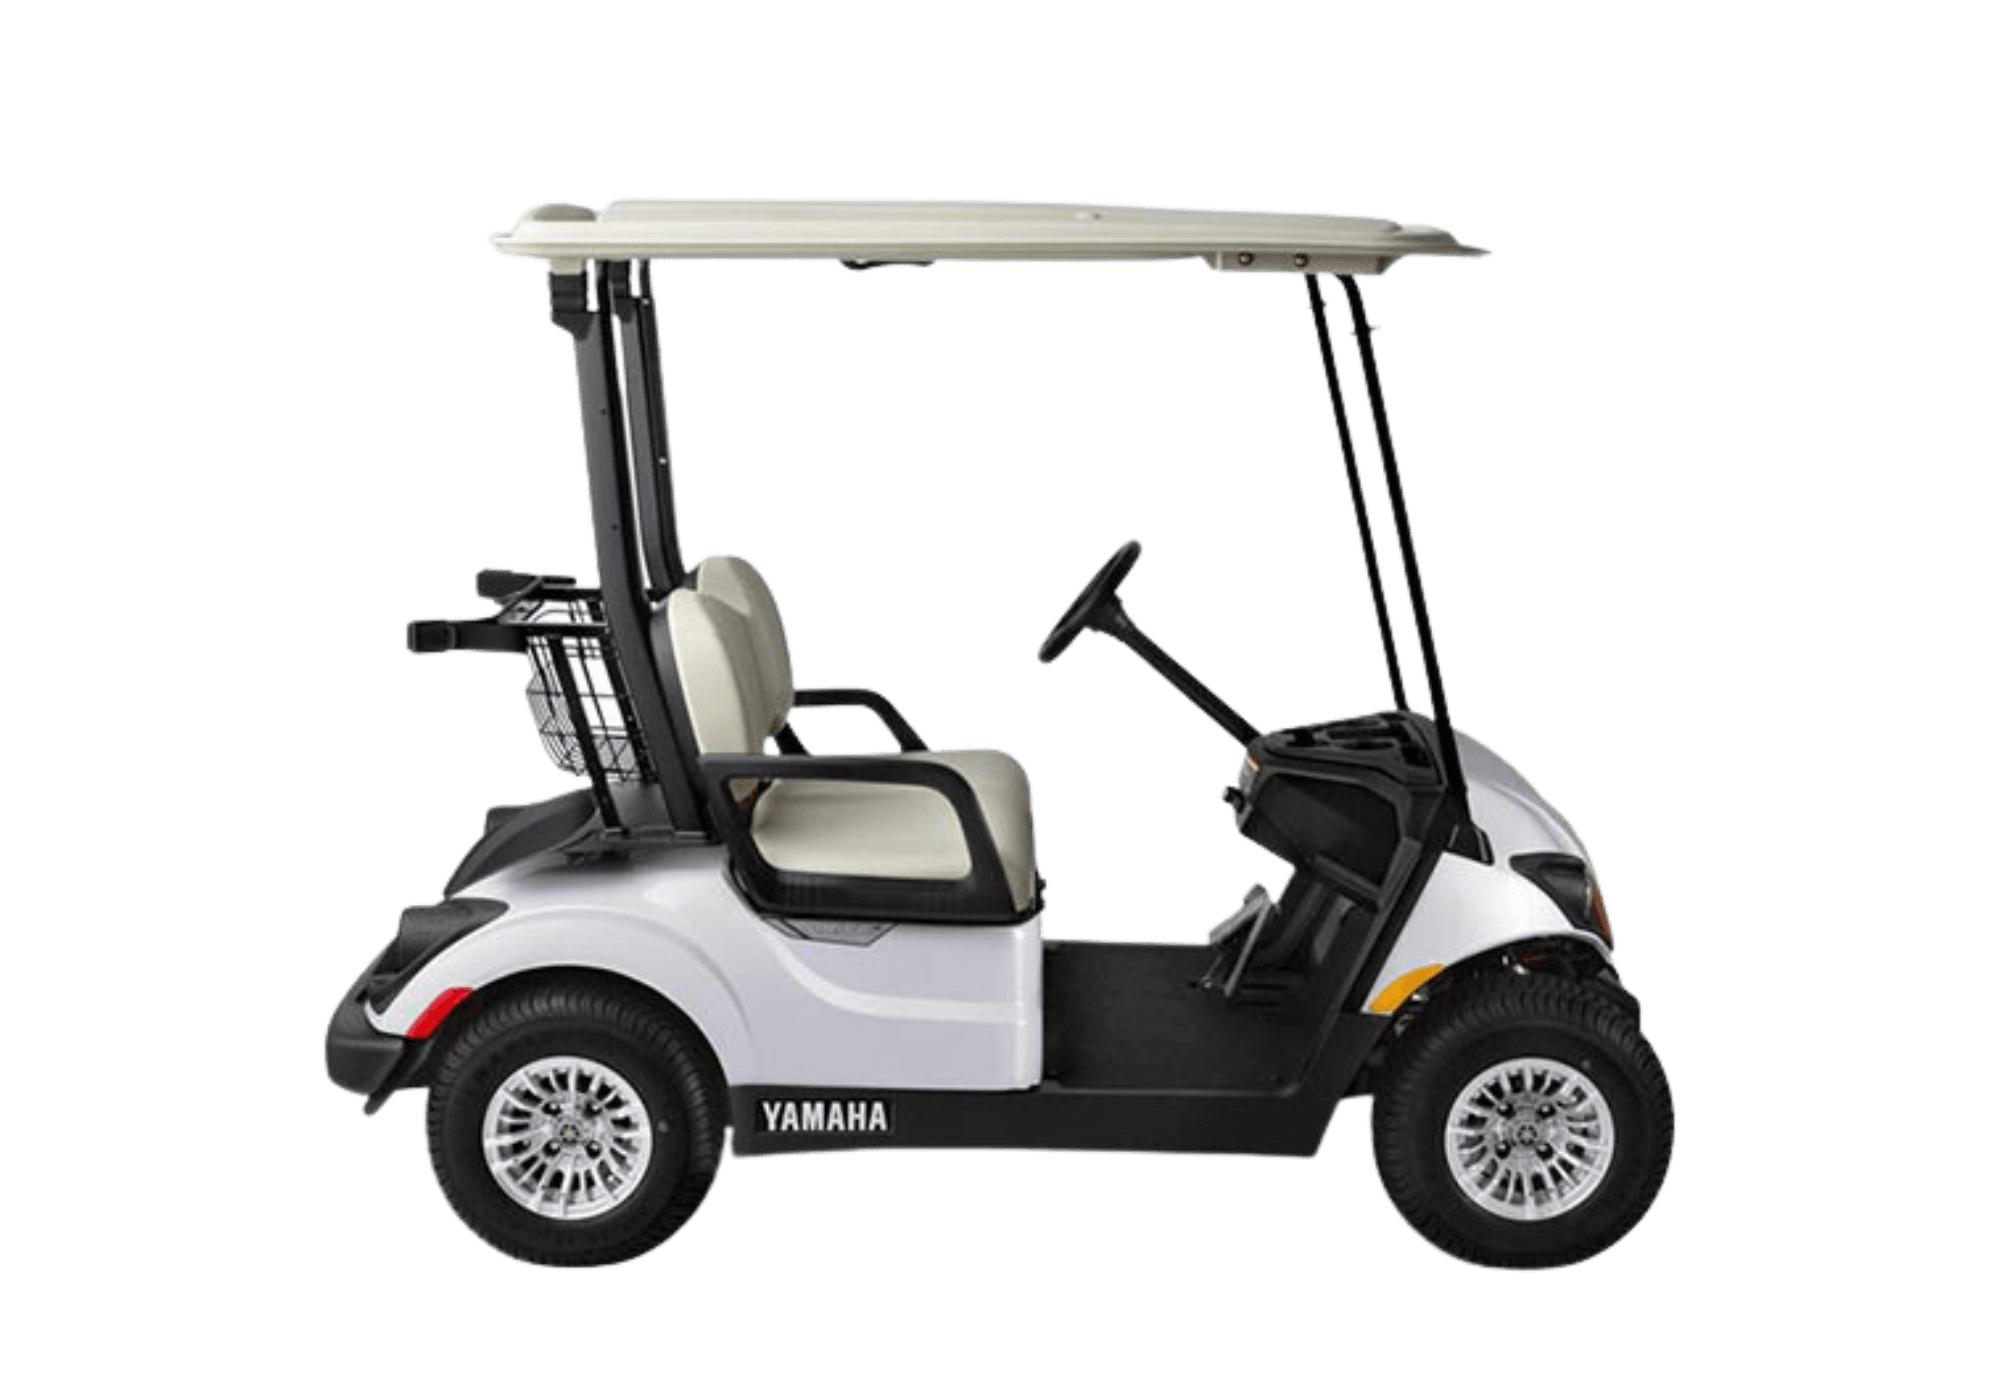 Yamaha makes some of the best golf carts